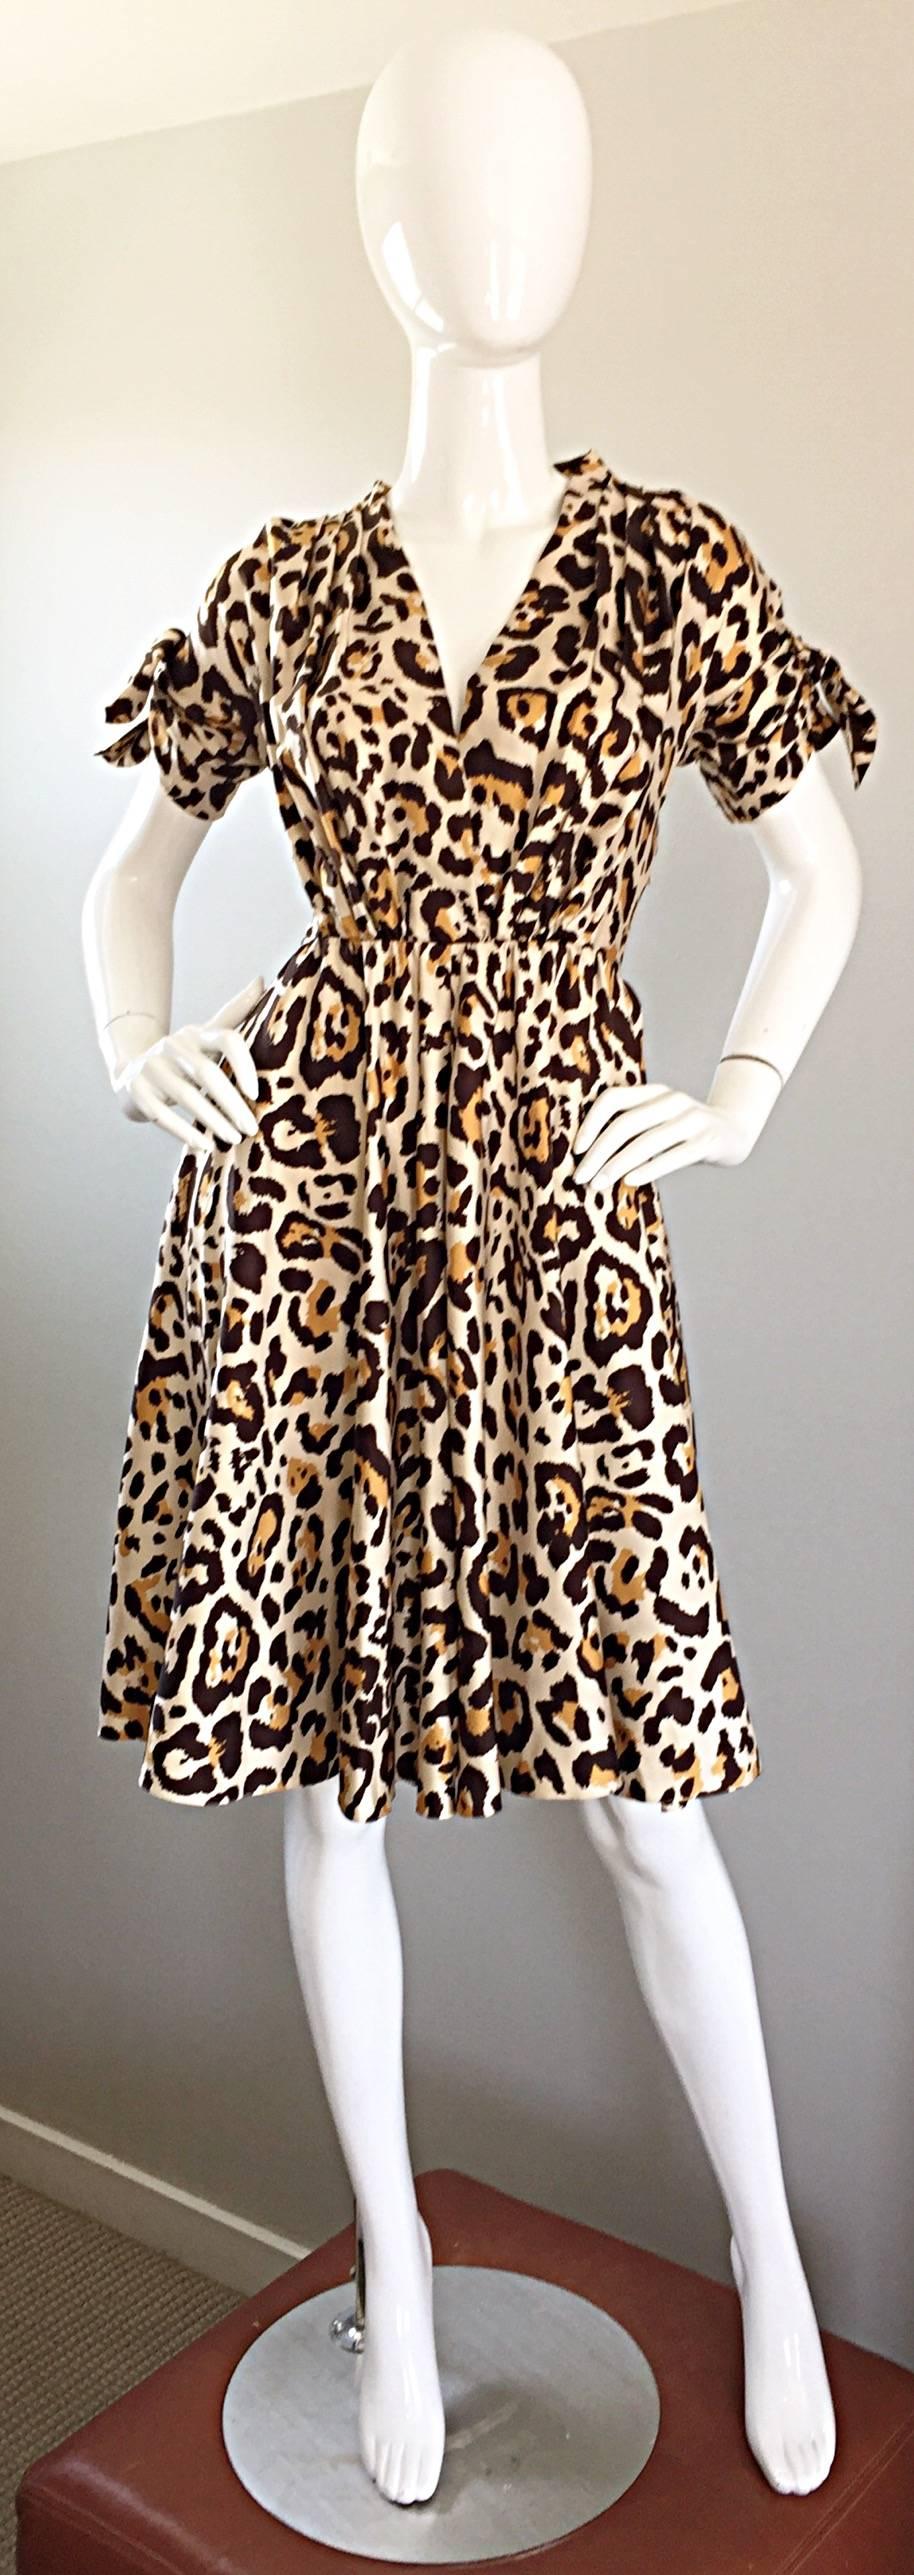 Beautiful JOHN GALLIANO for CHRISTIAN DIOR leopard print 40s style silk dress! Classic animal print on a luxurious silk that flows with the body like fluid!Chic ties at each exterior arm cuff. Flirty skirt with a nipped bodice that flatters the